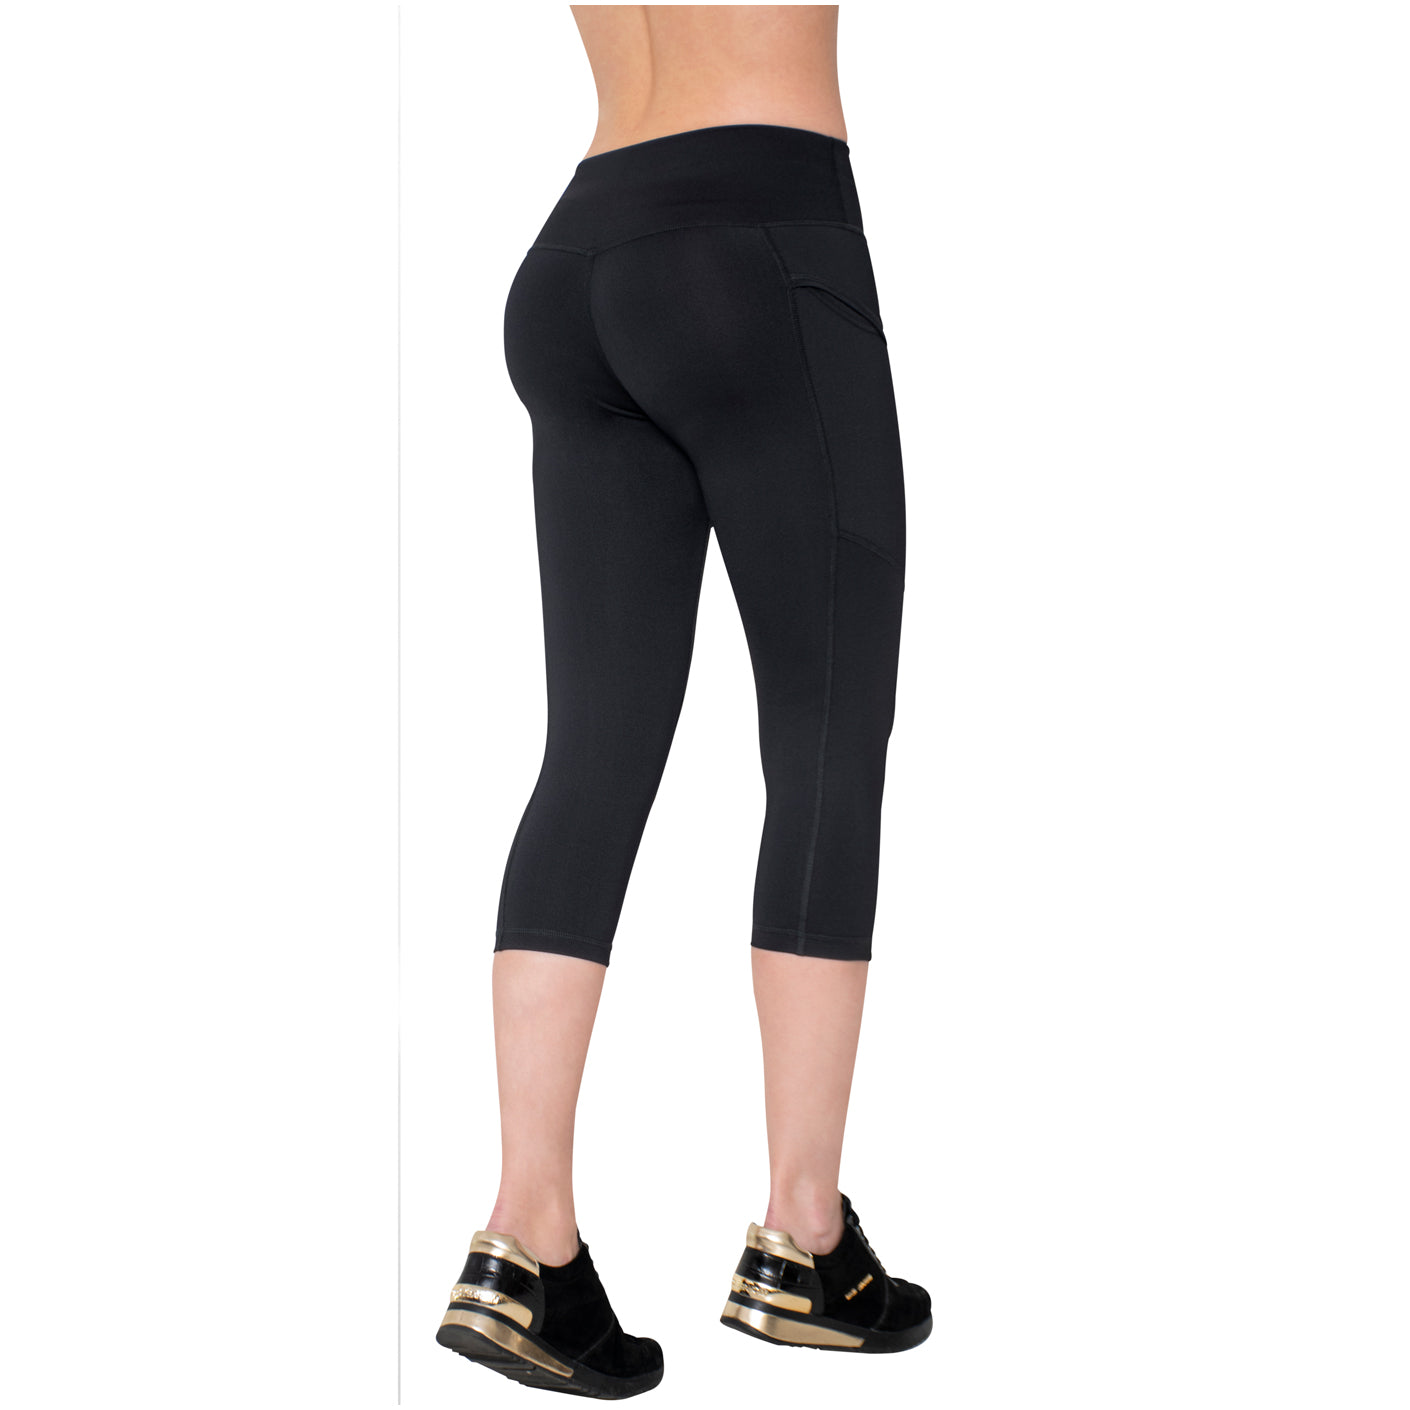 Women's Actiwear Workout Slimming Leggings with Tummy Control - Flexmee US